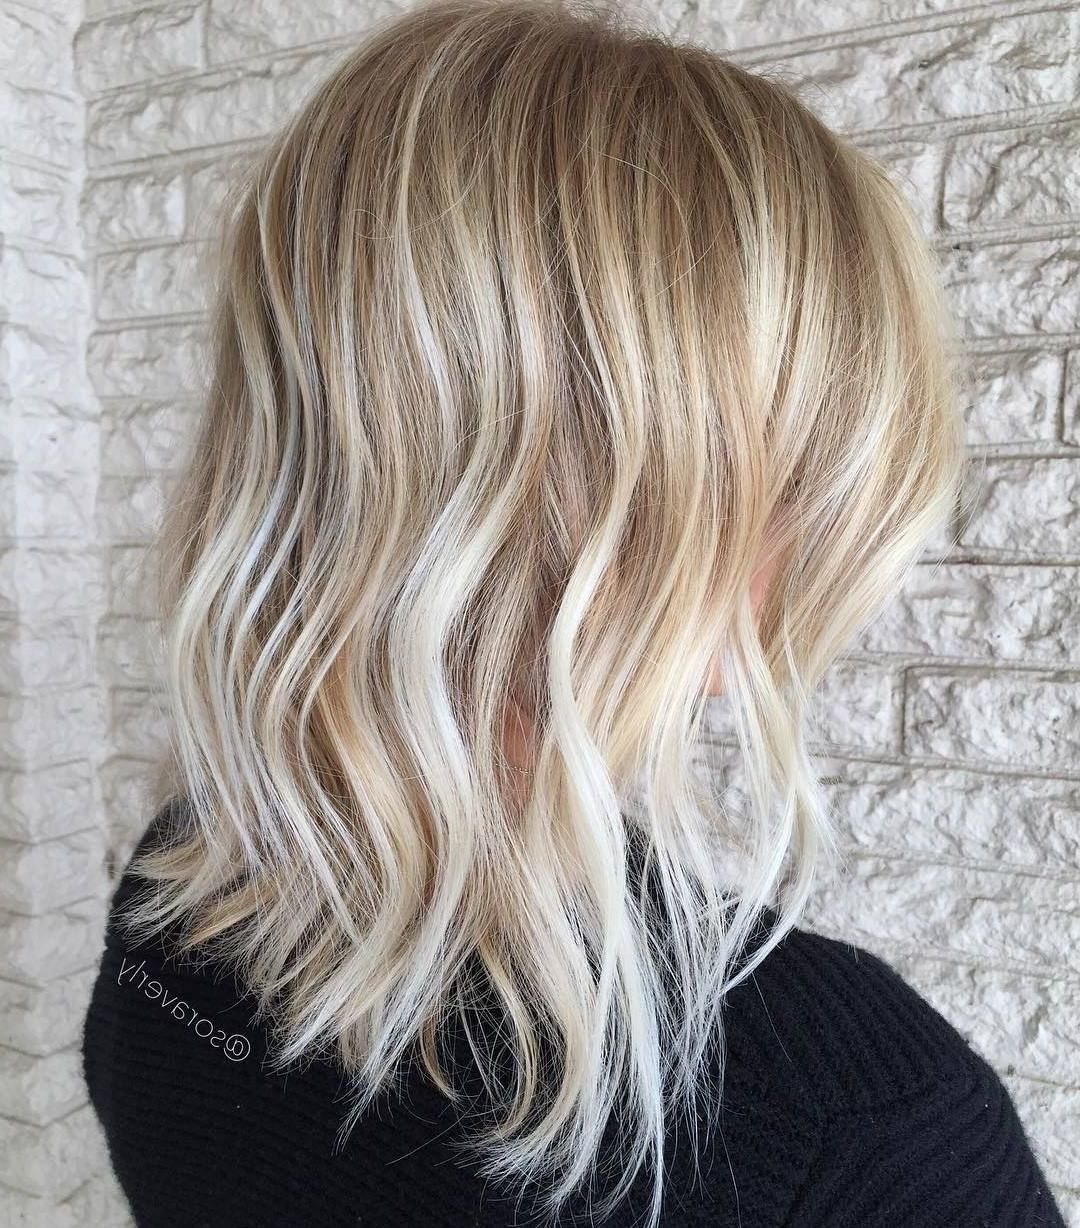 Pinterest Throughout Most Popular Textured Medium Length Look Blonde Hairstyles (View 1 of 20)